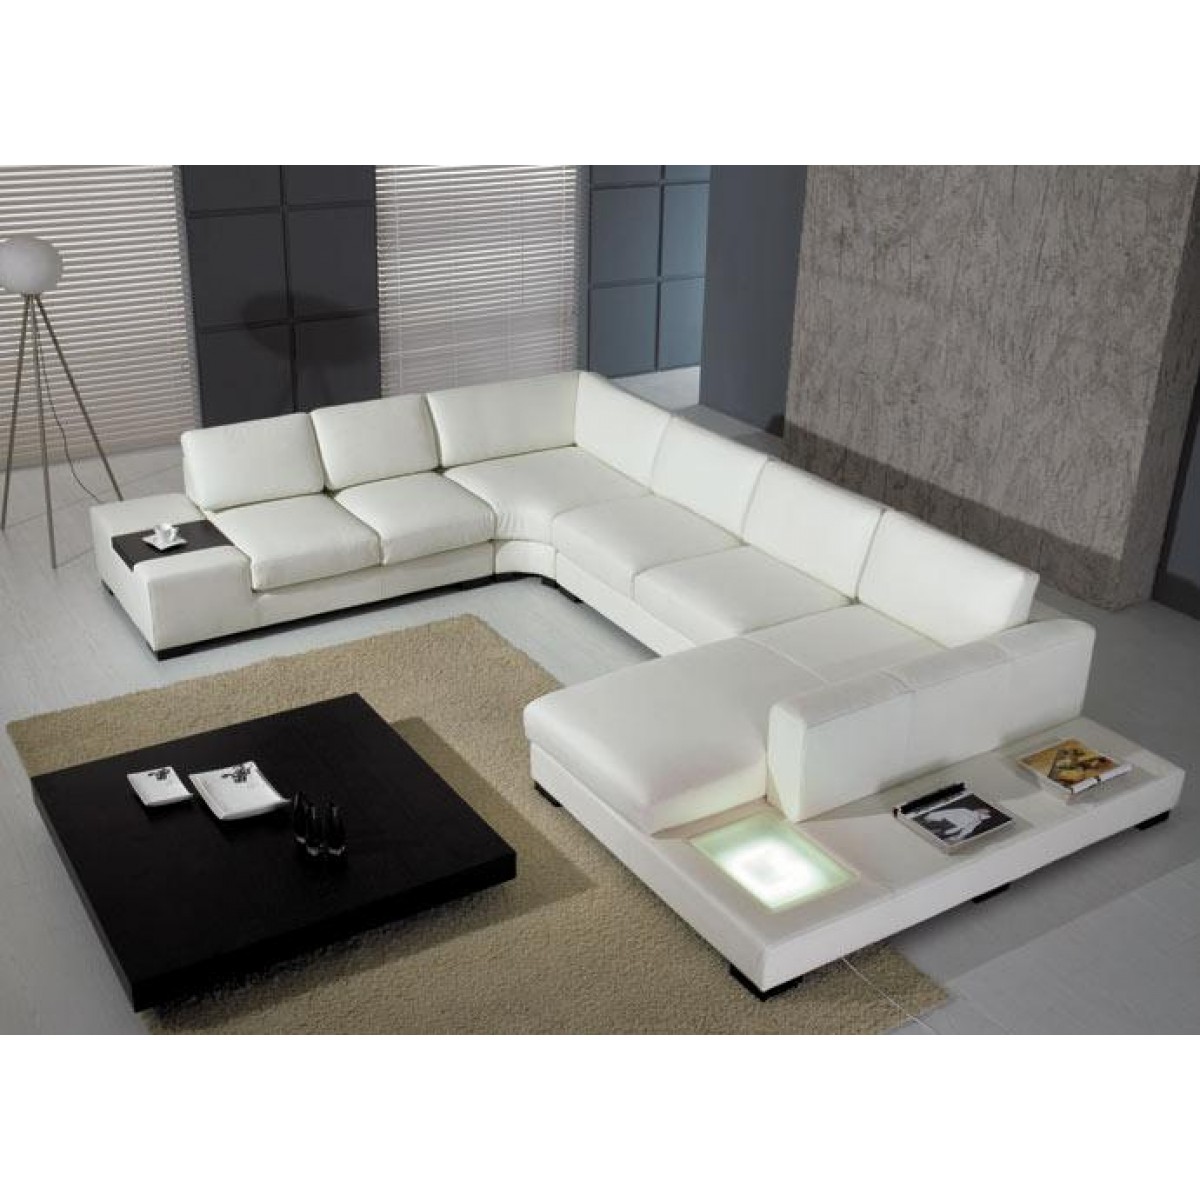 T35 White Leather Sectional, Modern White Leather Living Room Furniture